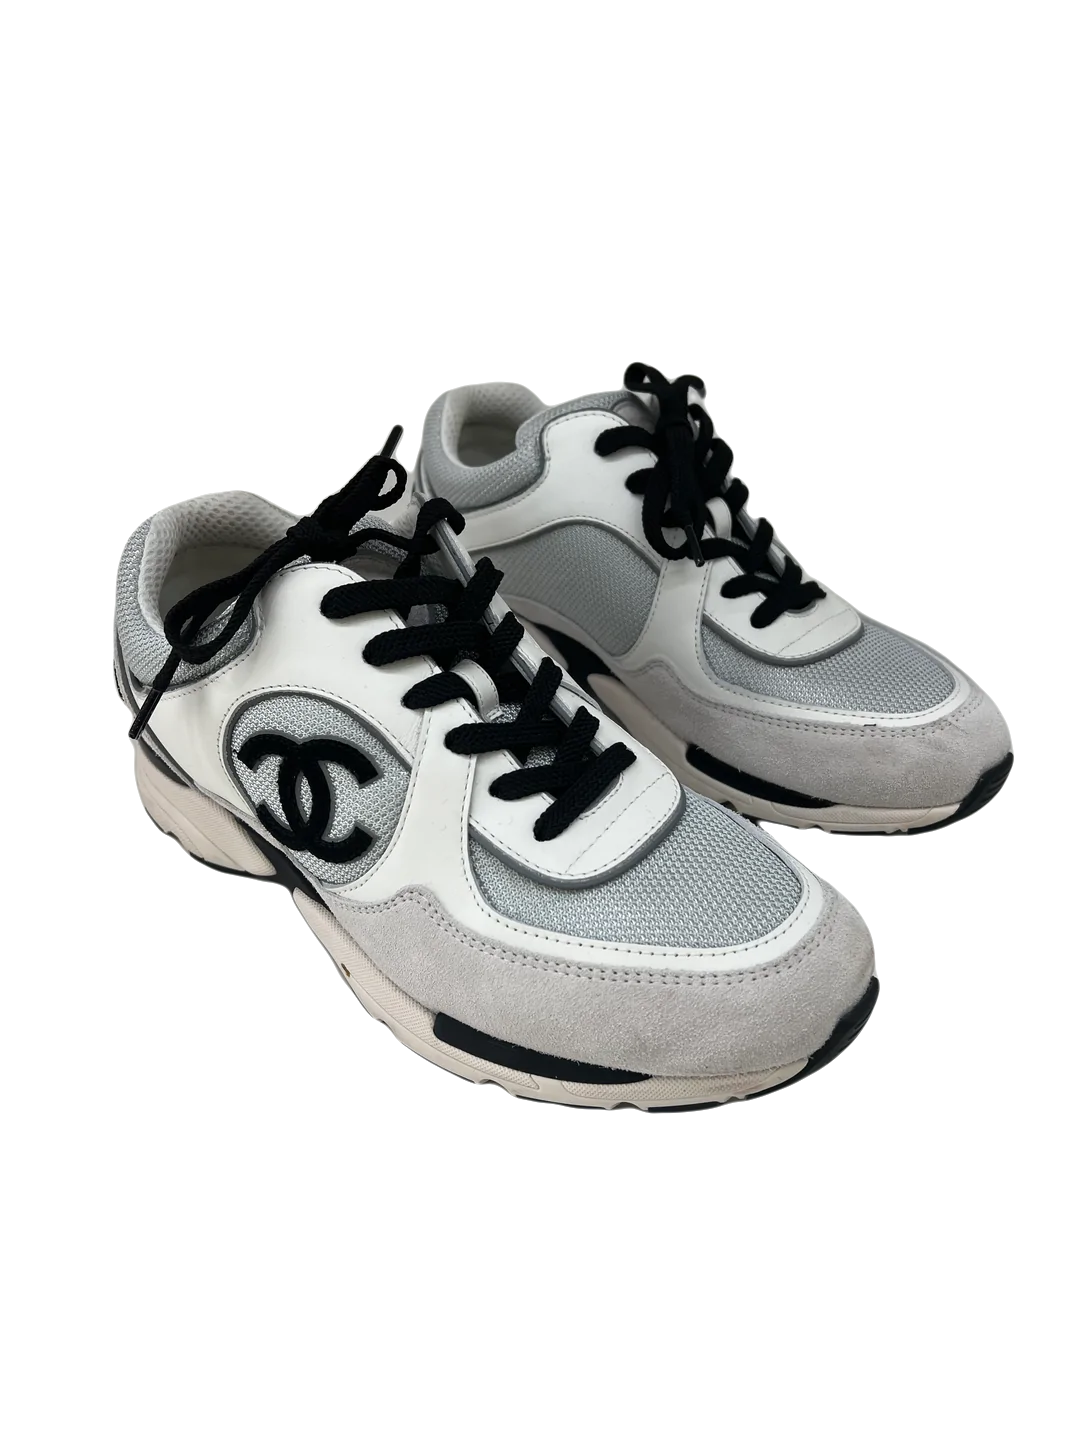 Chanel Sneakers - Size 40 - SOLD